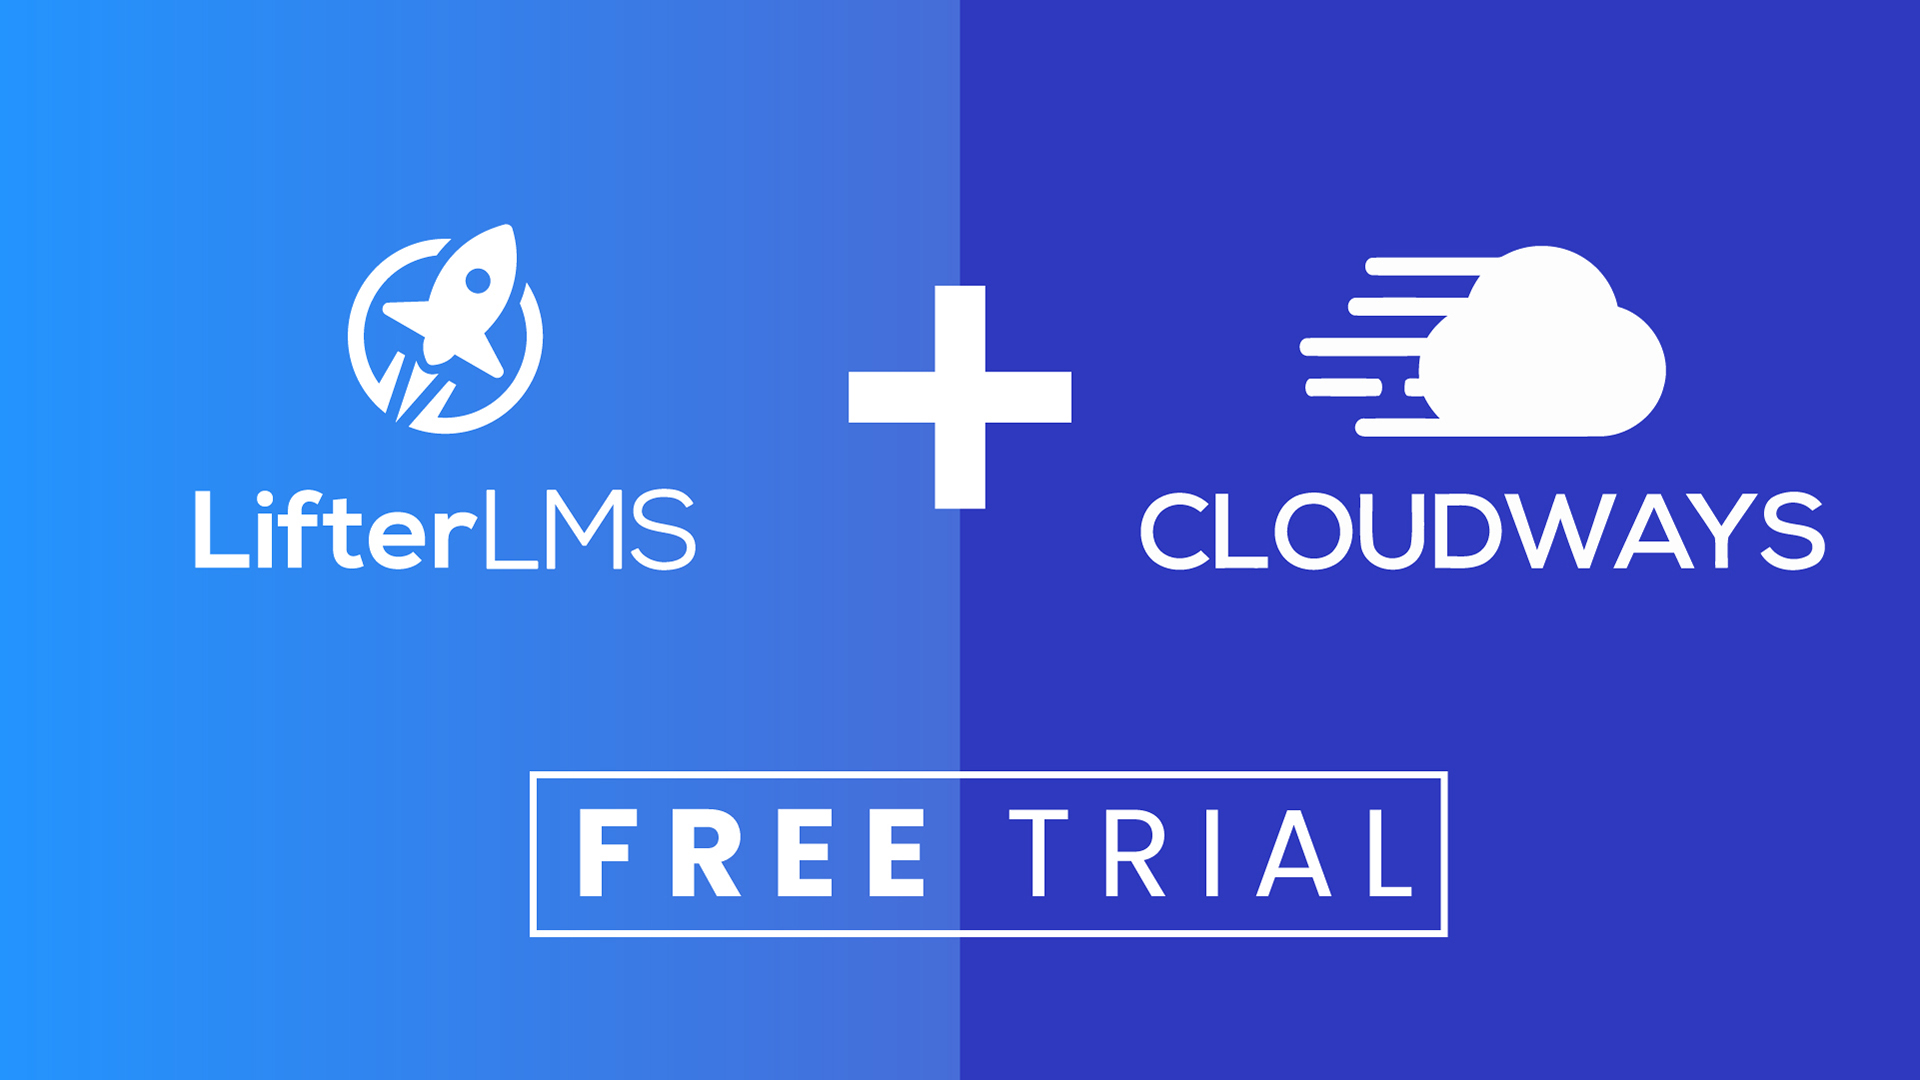 1257912_LifterLMS Cloudways Partnership Featured Image_121321